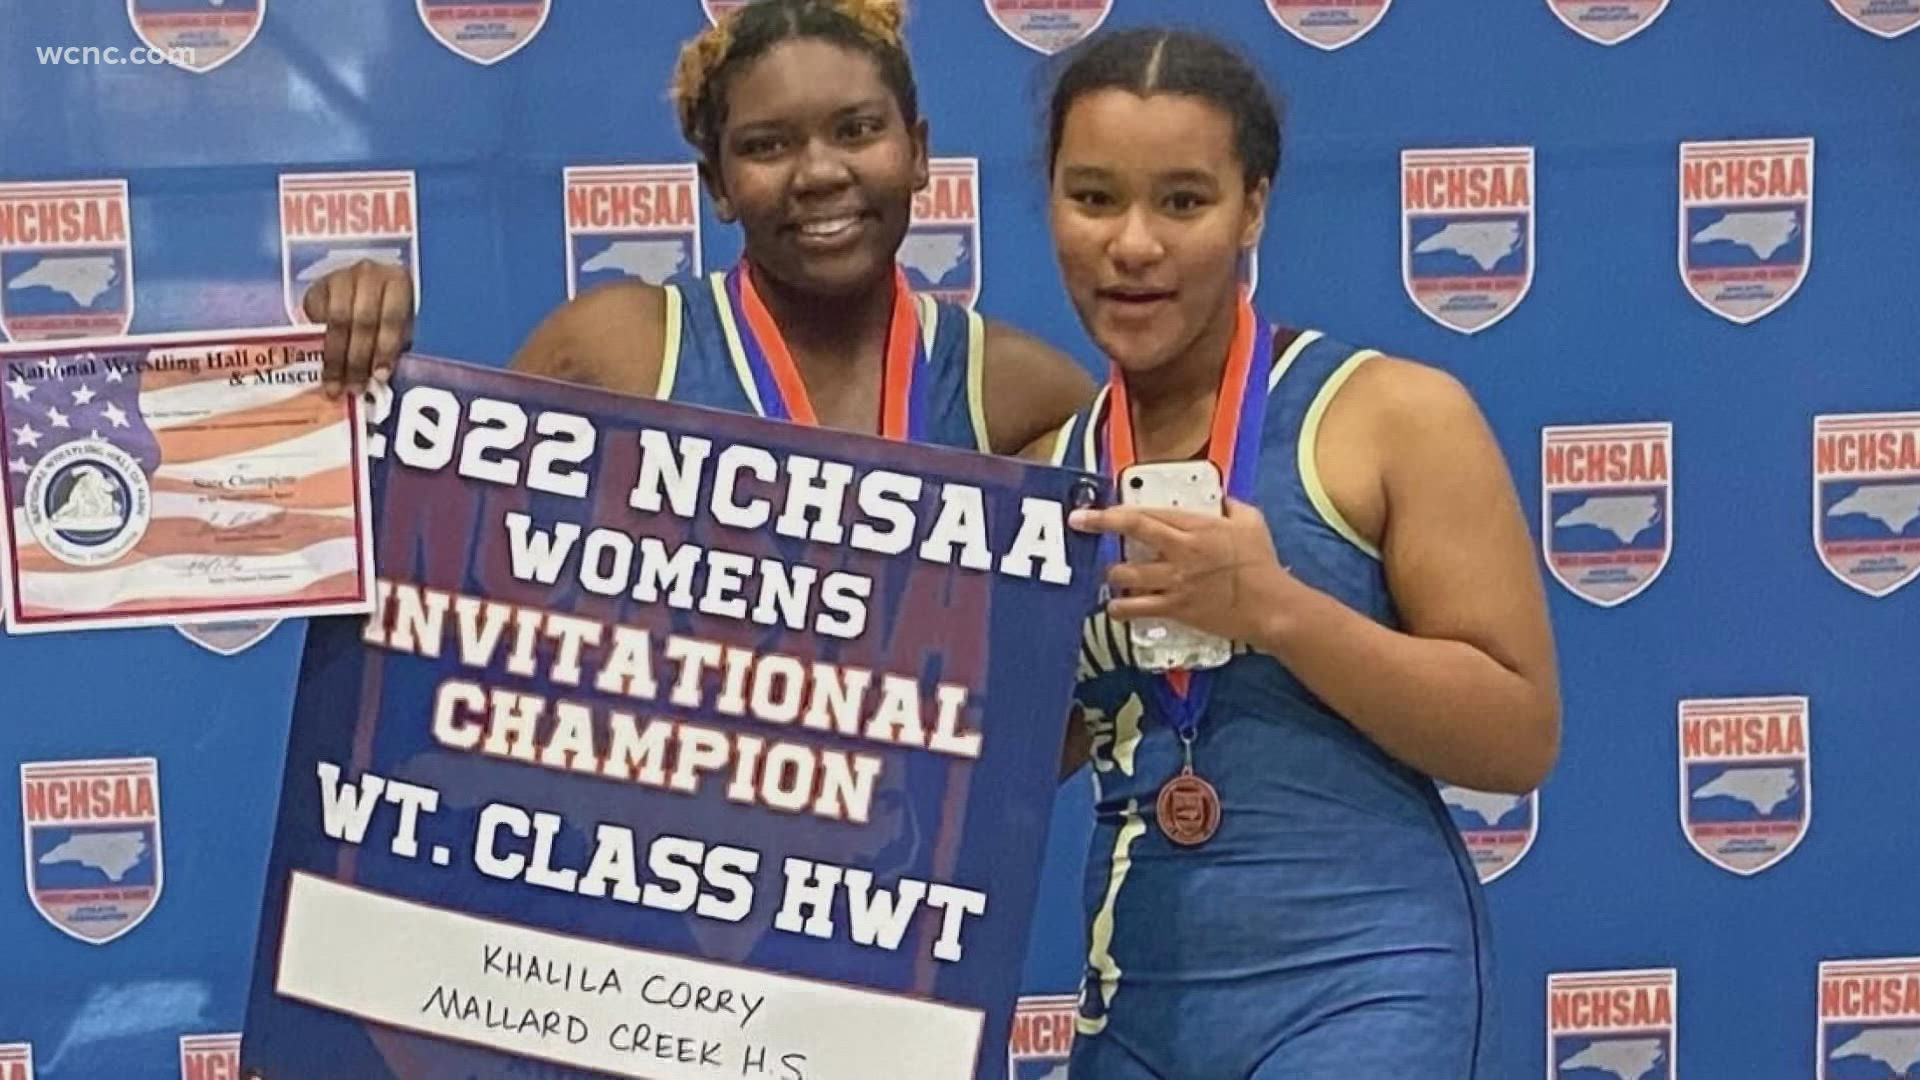 Corry's hard work has led to plenty of wins and plenty of medals, even winning the women’s invitational state champion title in her weight class this year.